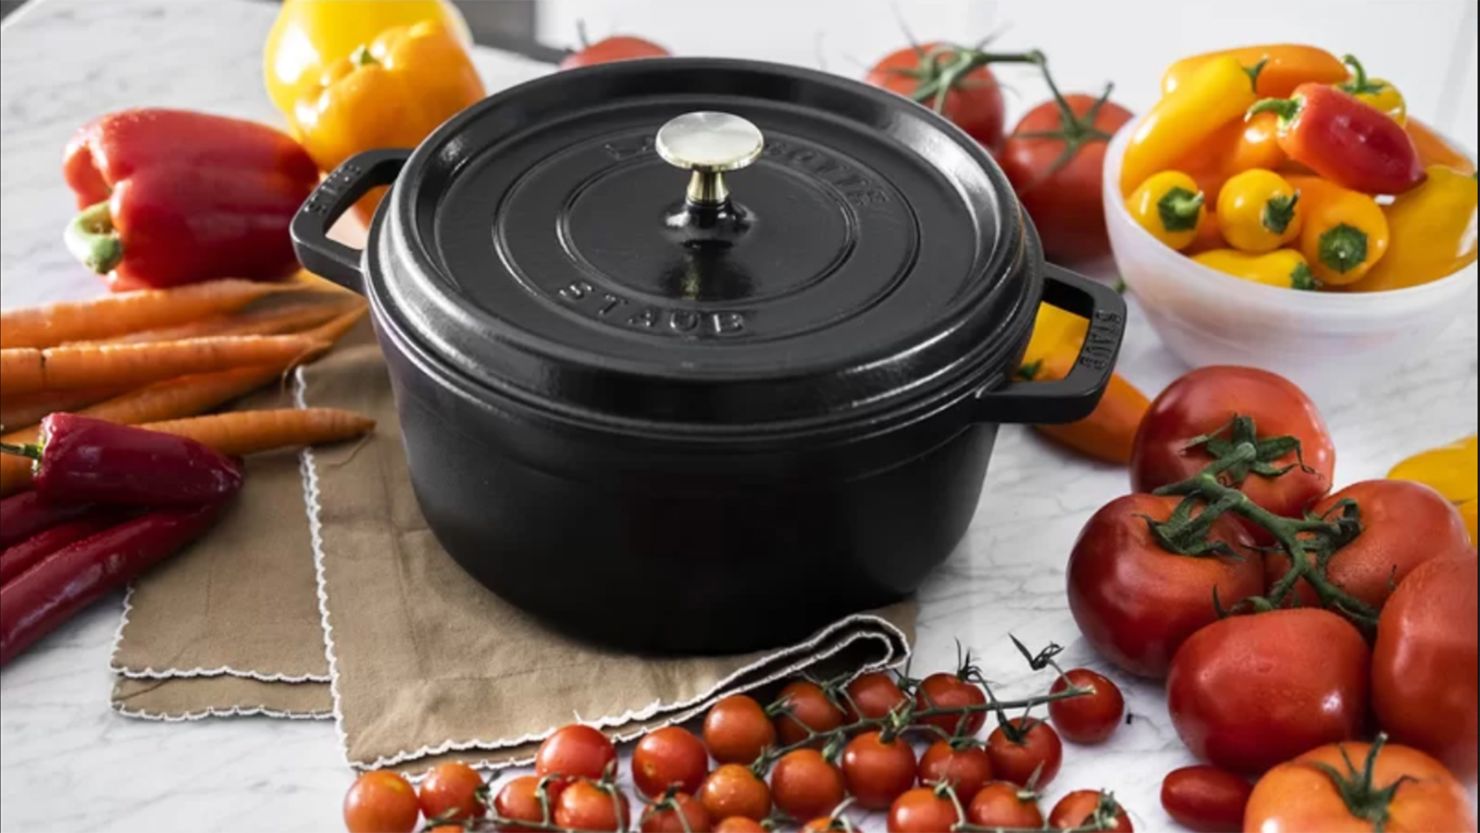 Wayfair Cyber Monday deals 2021: Cuisinart, Lodge and more